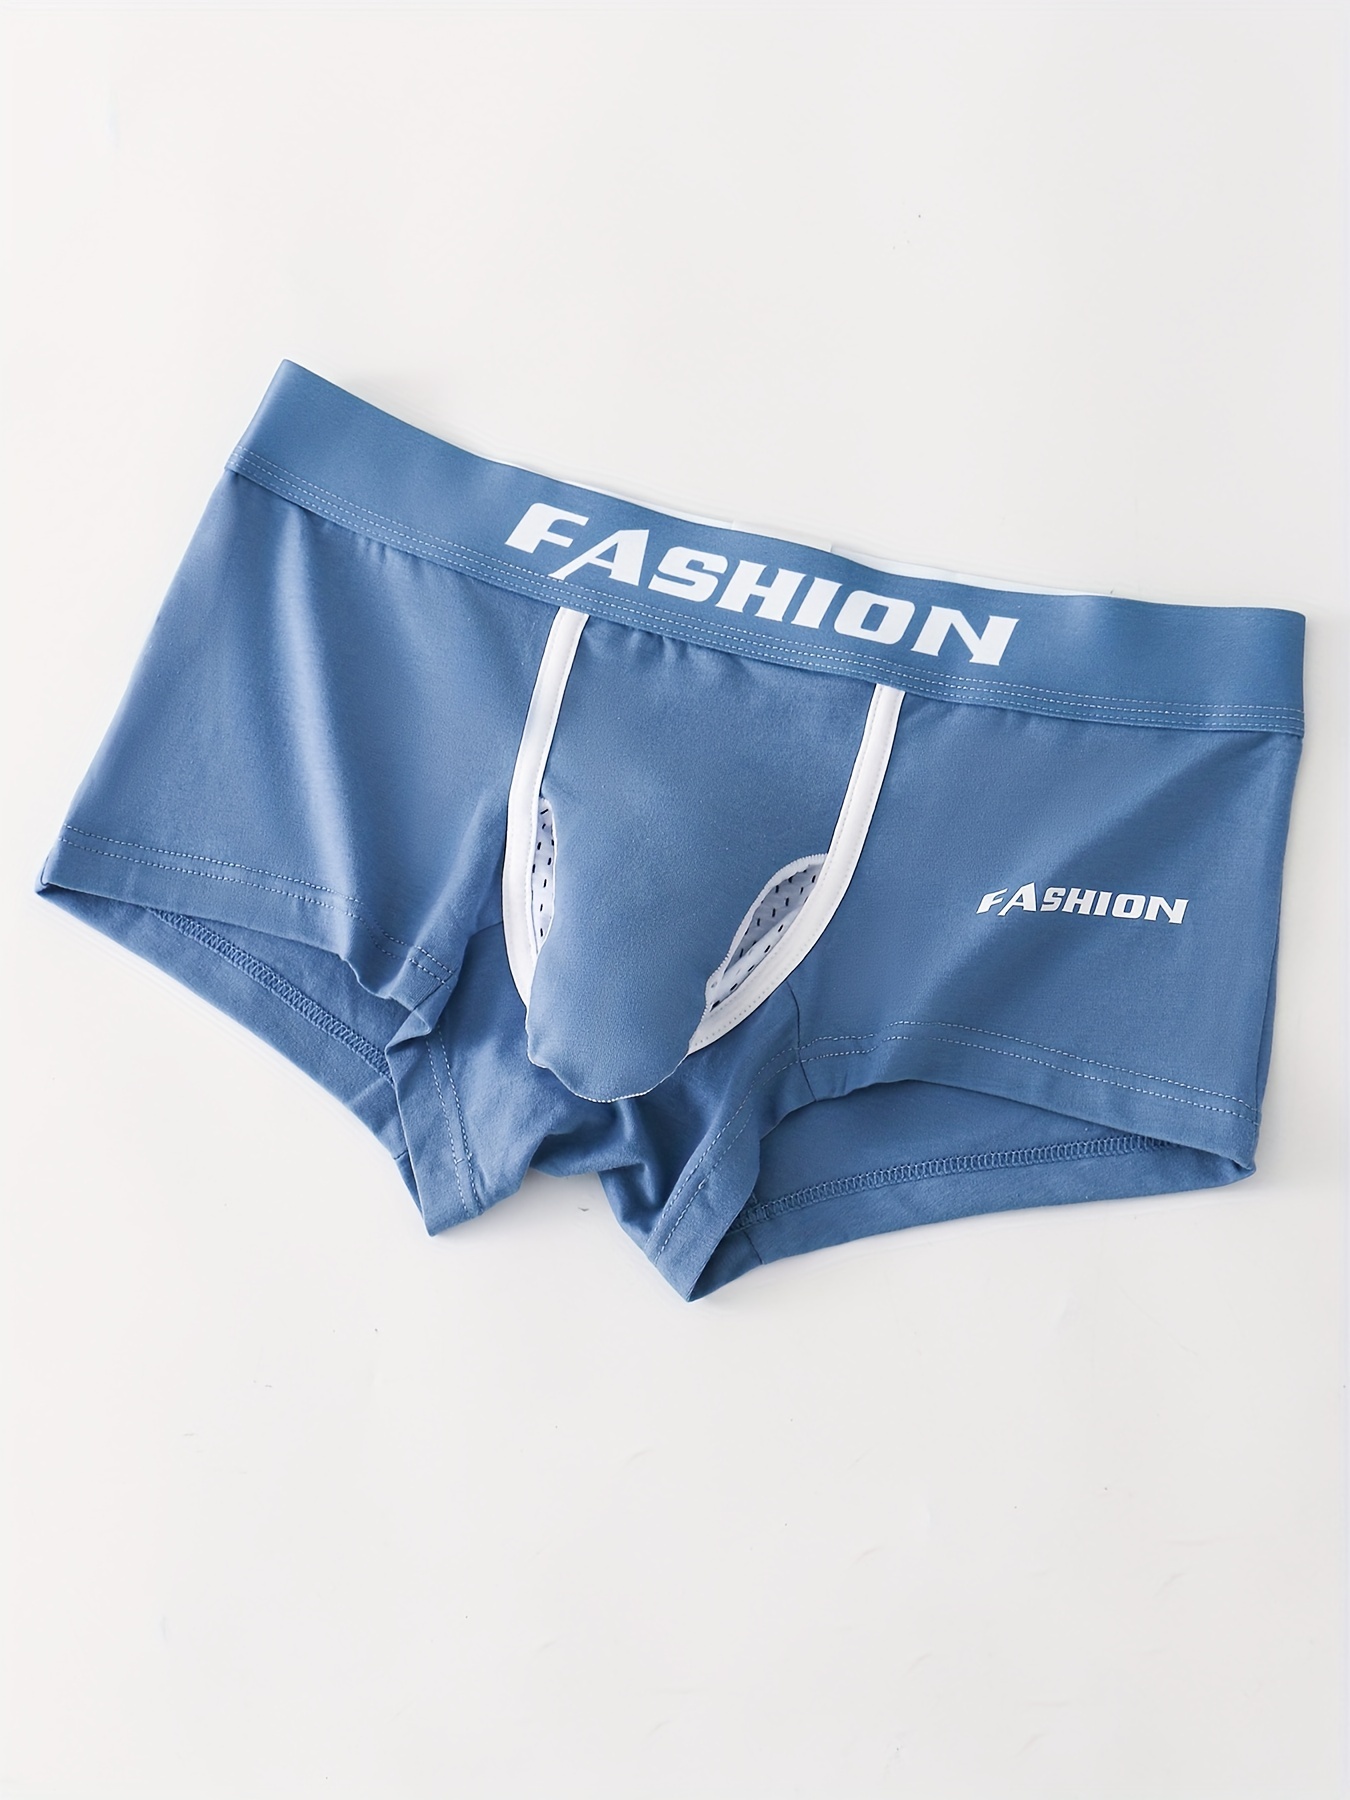 These Men's Boxers Have a Penis Pouch That's Insanely Comfortable